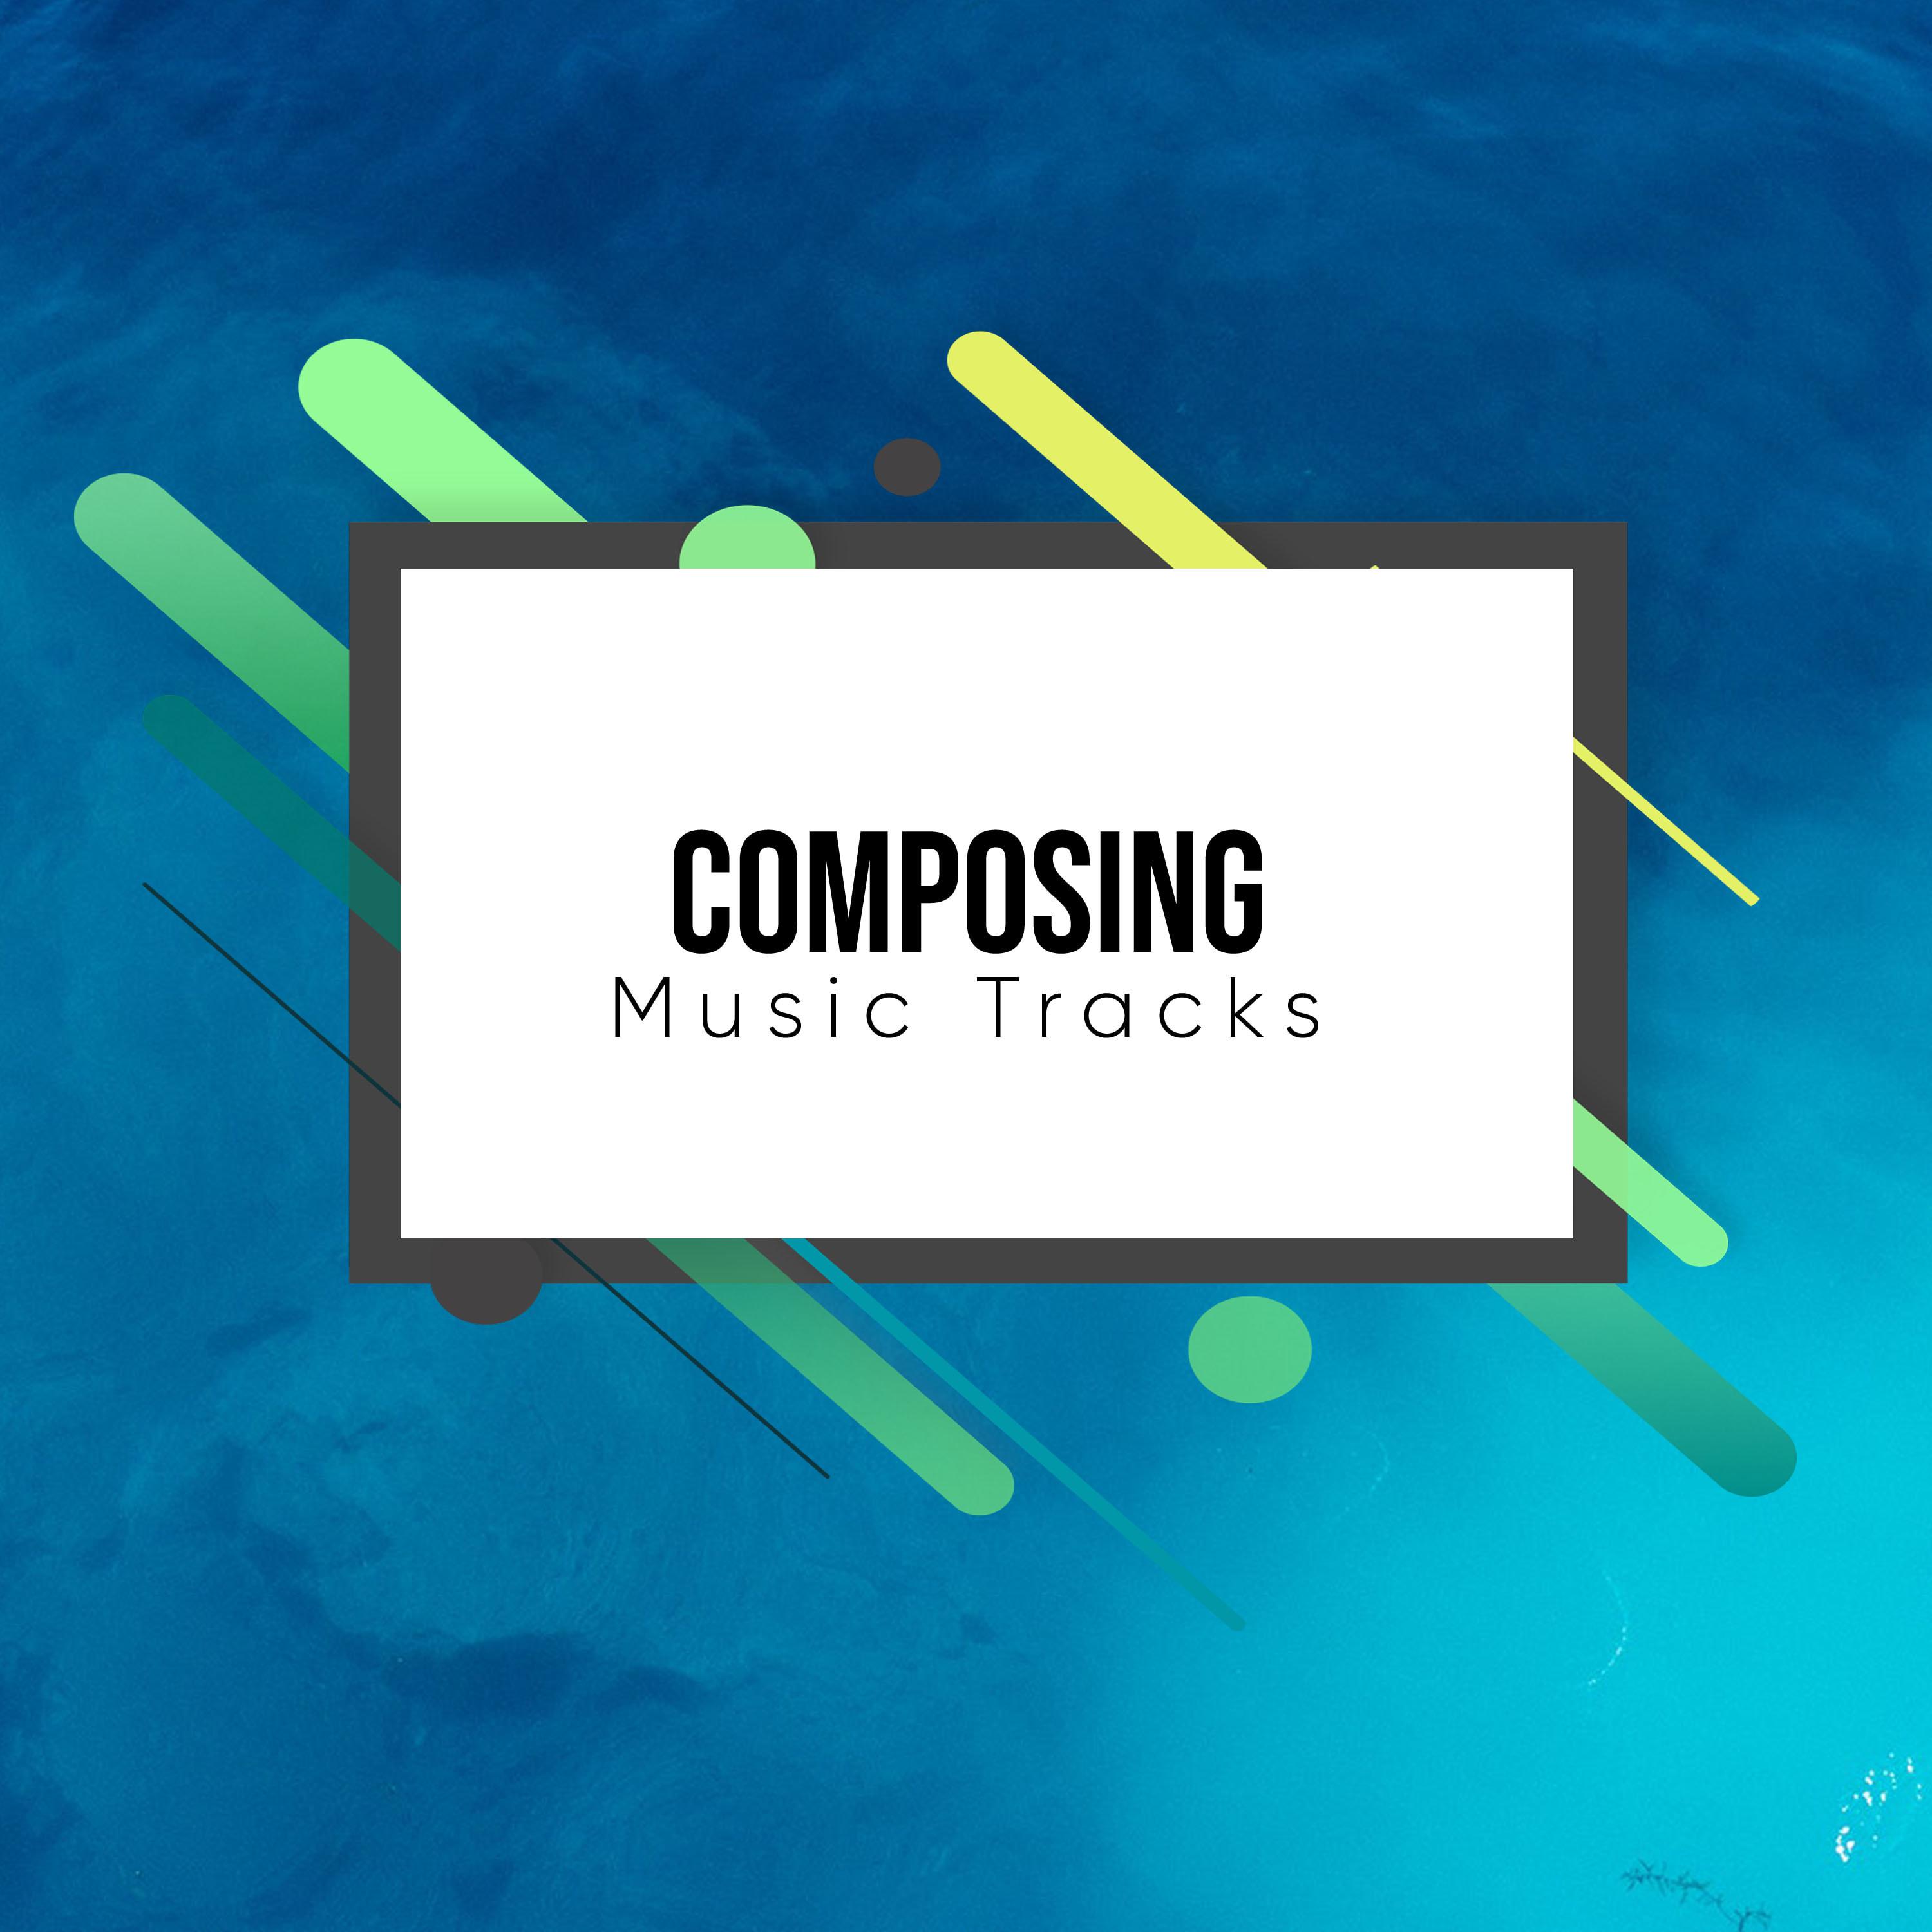 #18 Composing Music Tracks for Ultimate Spa Relaxation